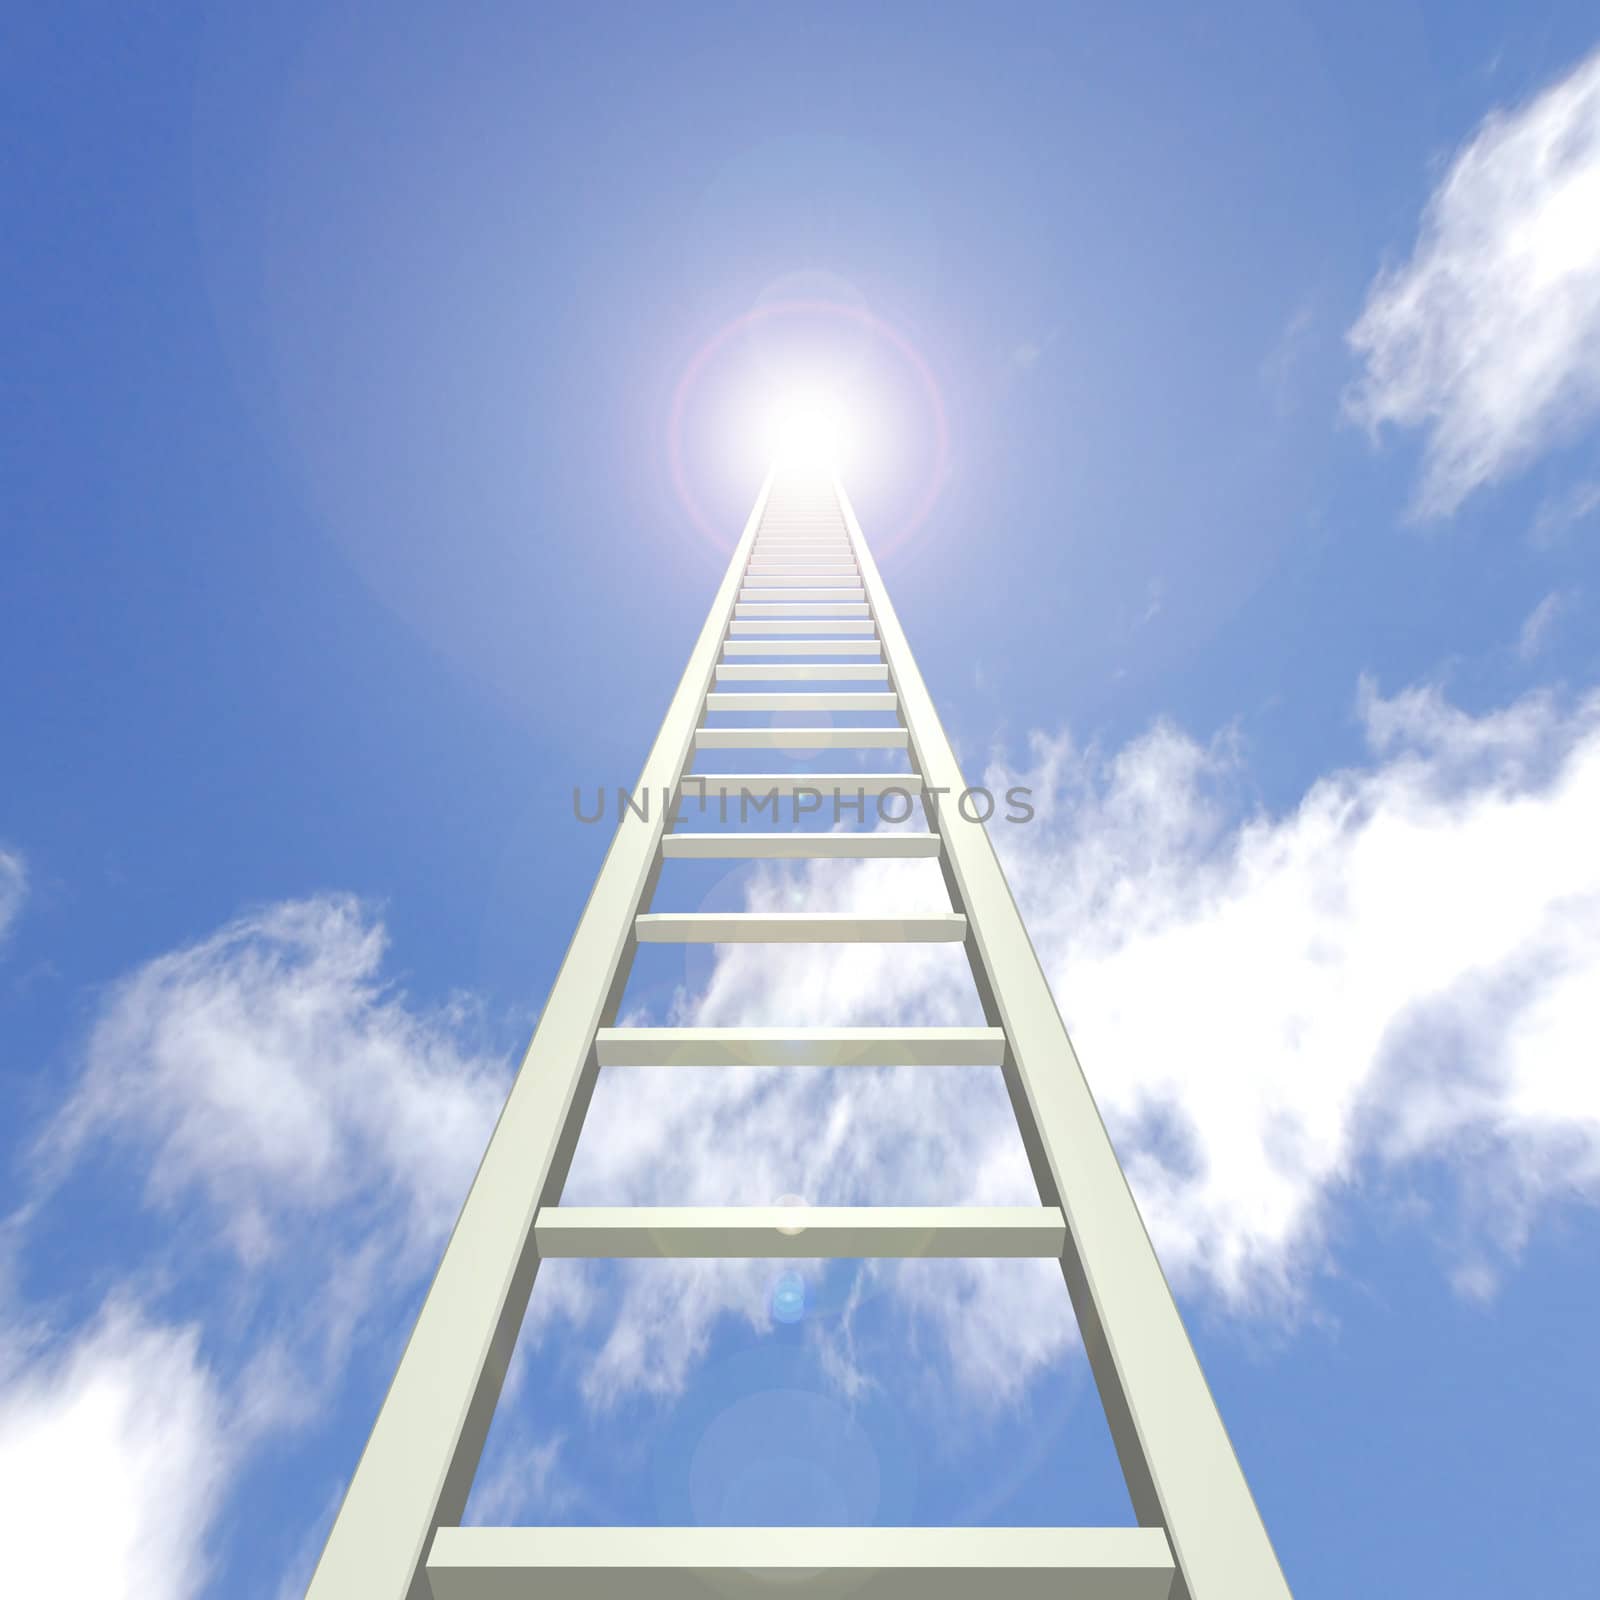 Image of a ladder reaching up towards a blue sky.